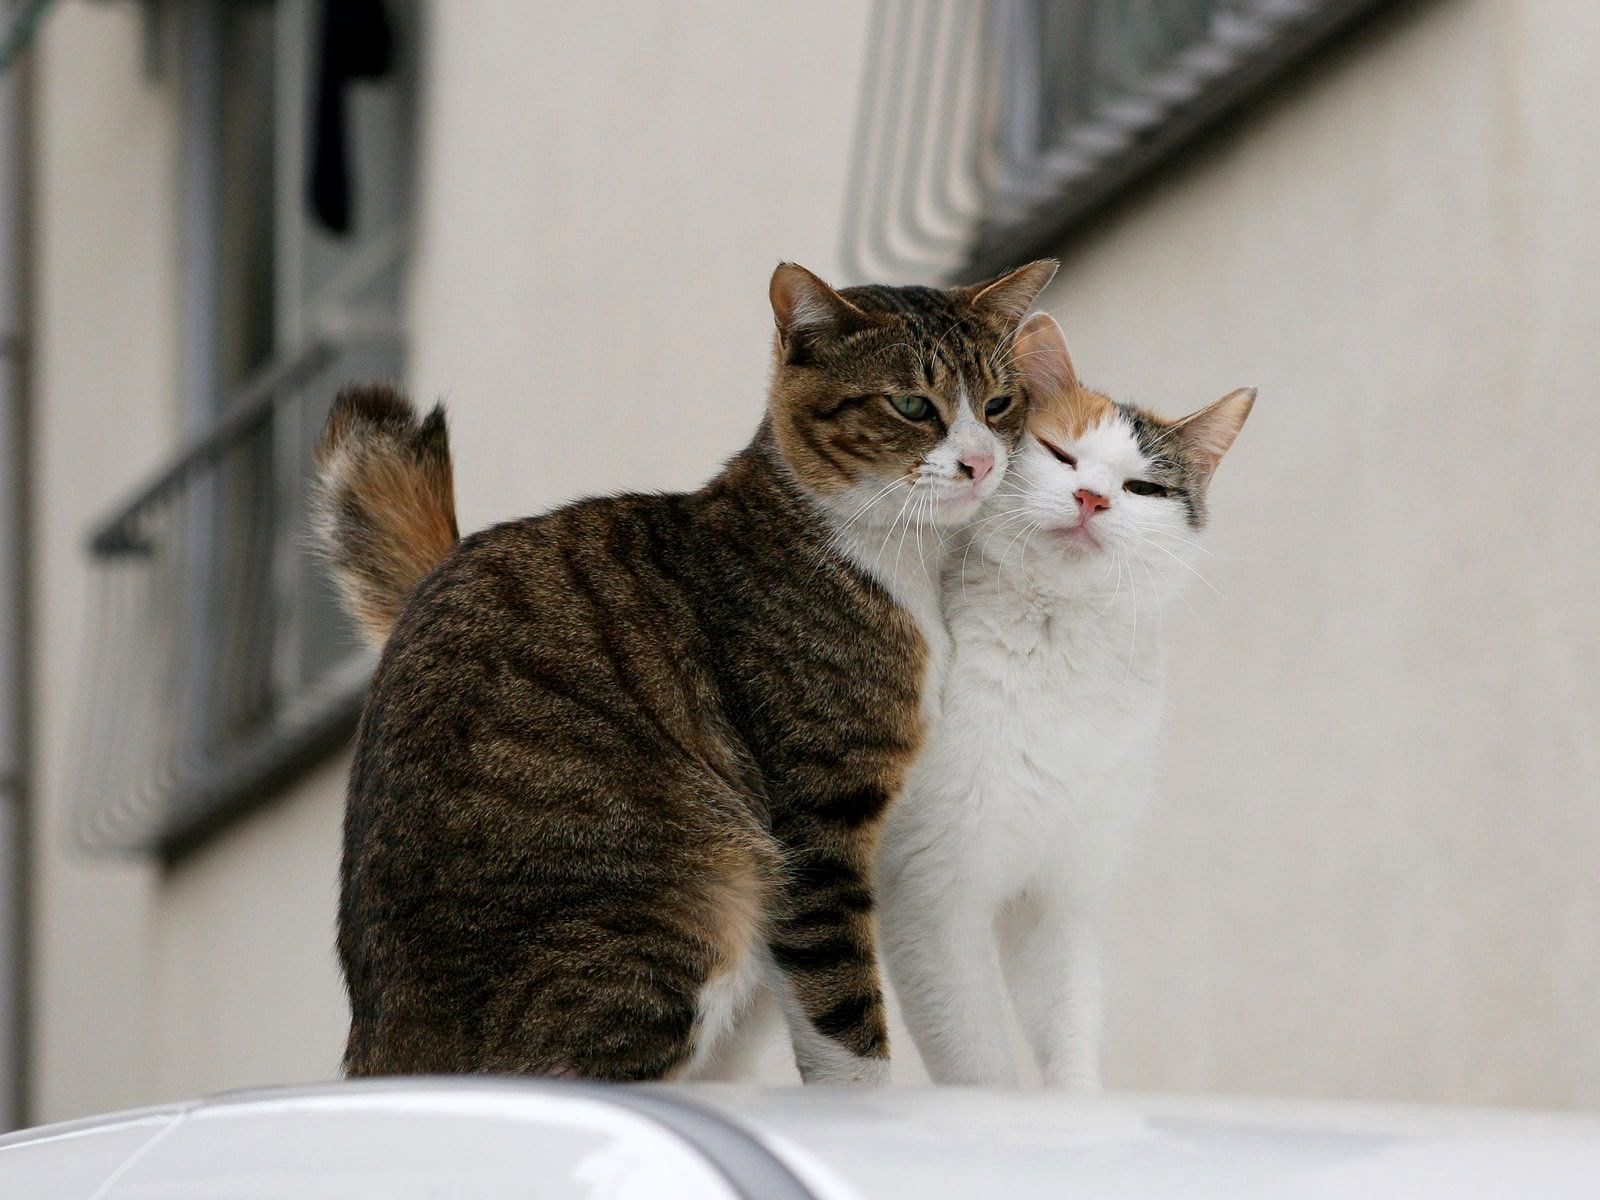 Full HD cats, animals, love, couple, pair, tenderness